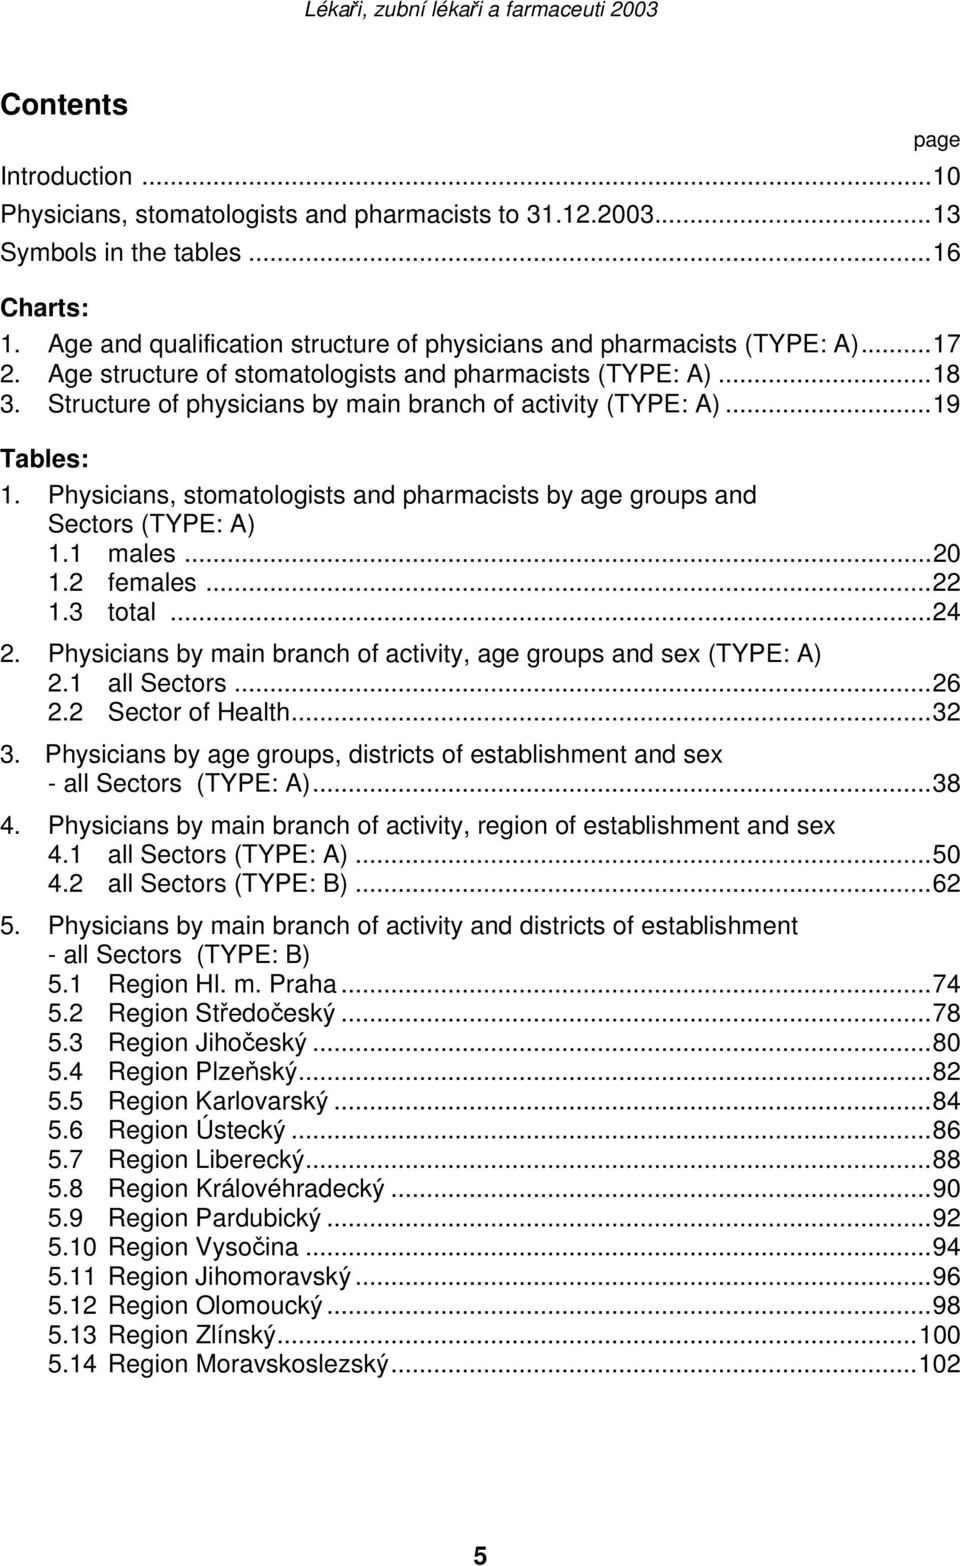 Physicians, stomatologists and pharmacists by age groups and Sectors (TYPE: A) 1.1 males...20 1.2 females...22 1.3 total...24 2. Physicians by main branch of activity, age groups and sex (TYPE: A) 2.